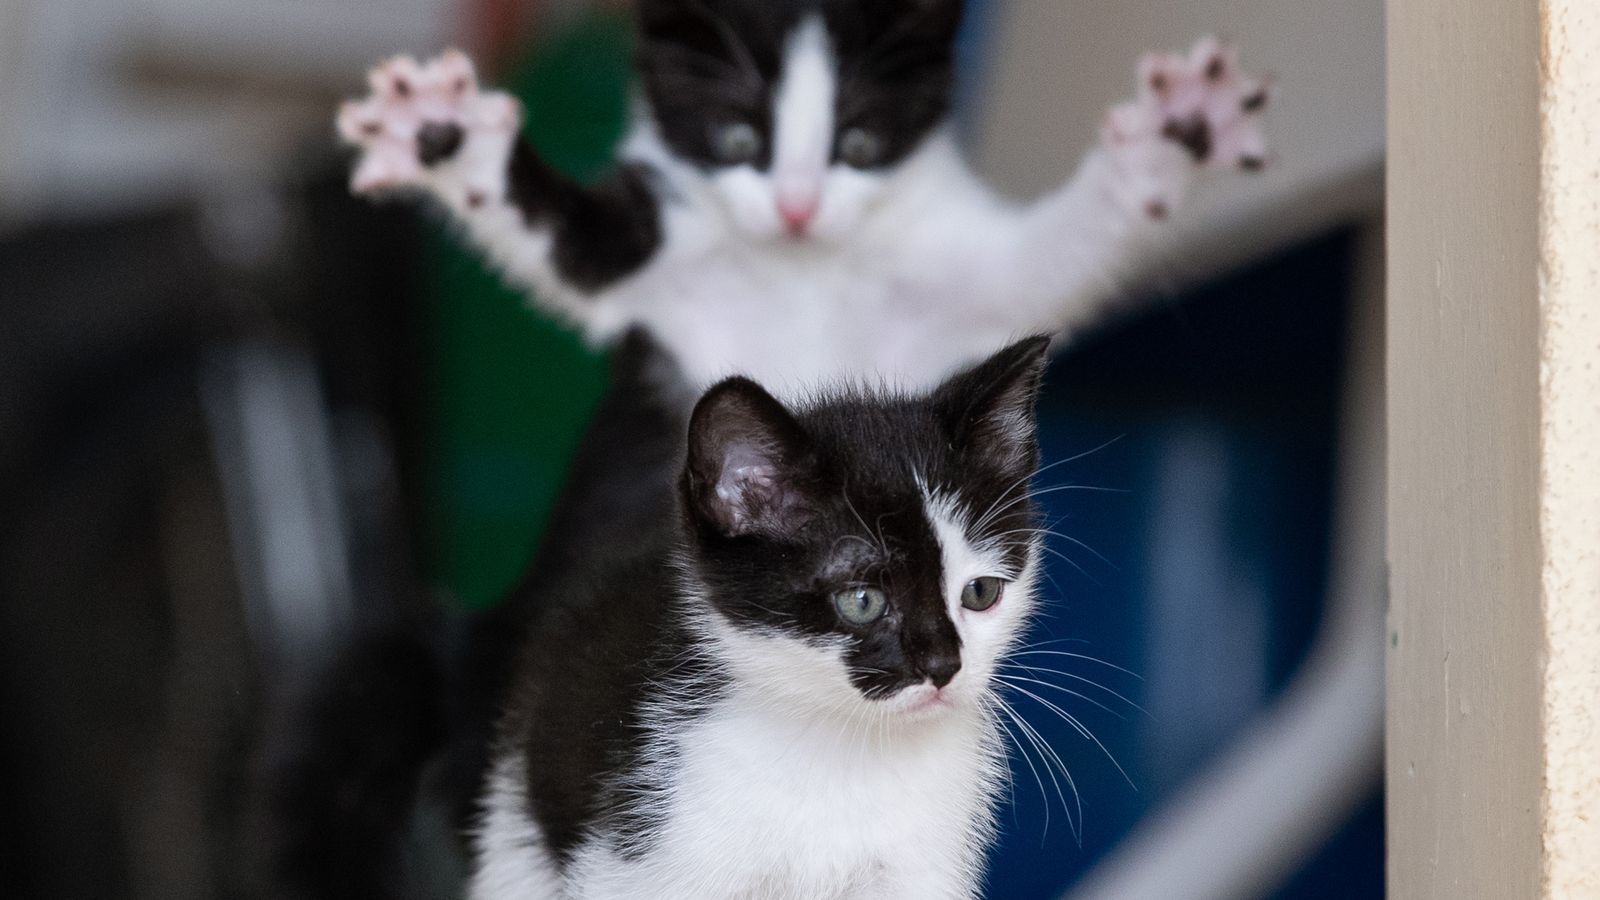 Comedy Pet Photography Awards: Pouncing kittens and diving dogs among the winners